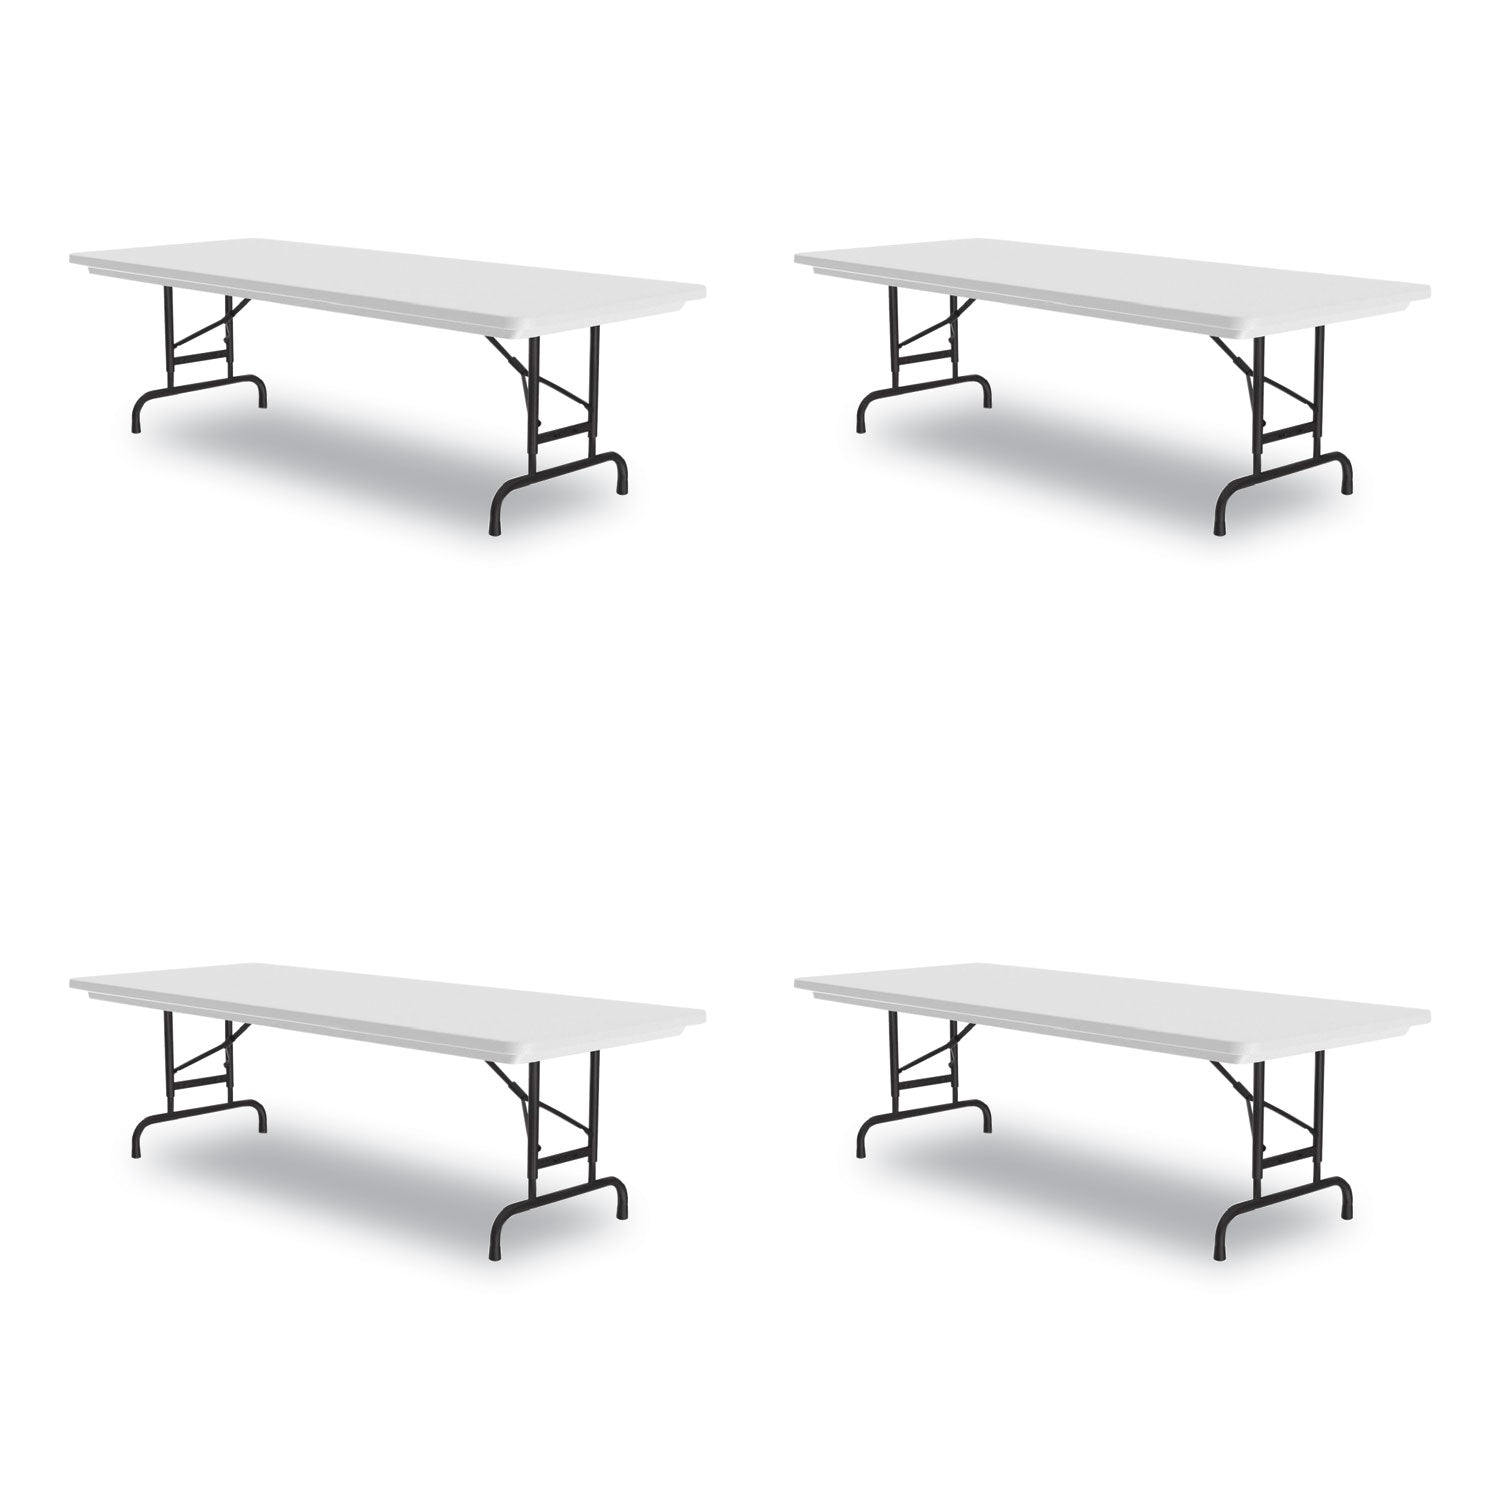 adjustable-folding-tables-rectangular-96-x-30-x-22-to-32-gray-top-black-legs-4-pallet-ships-in-4-6-business-days_crlra3096234p - 1